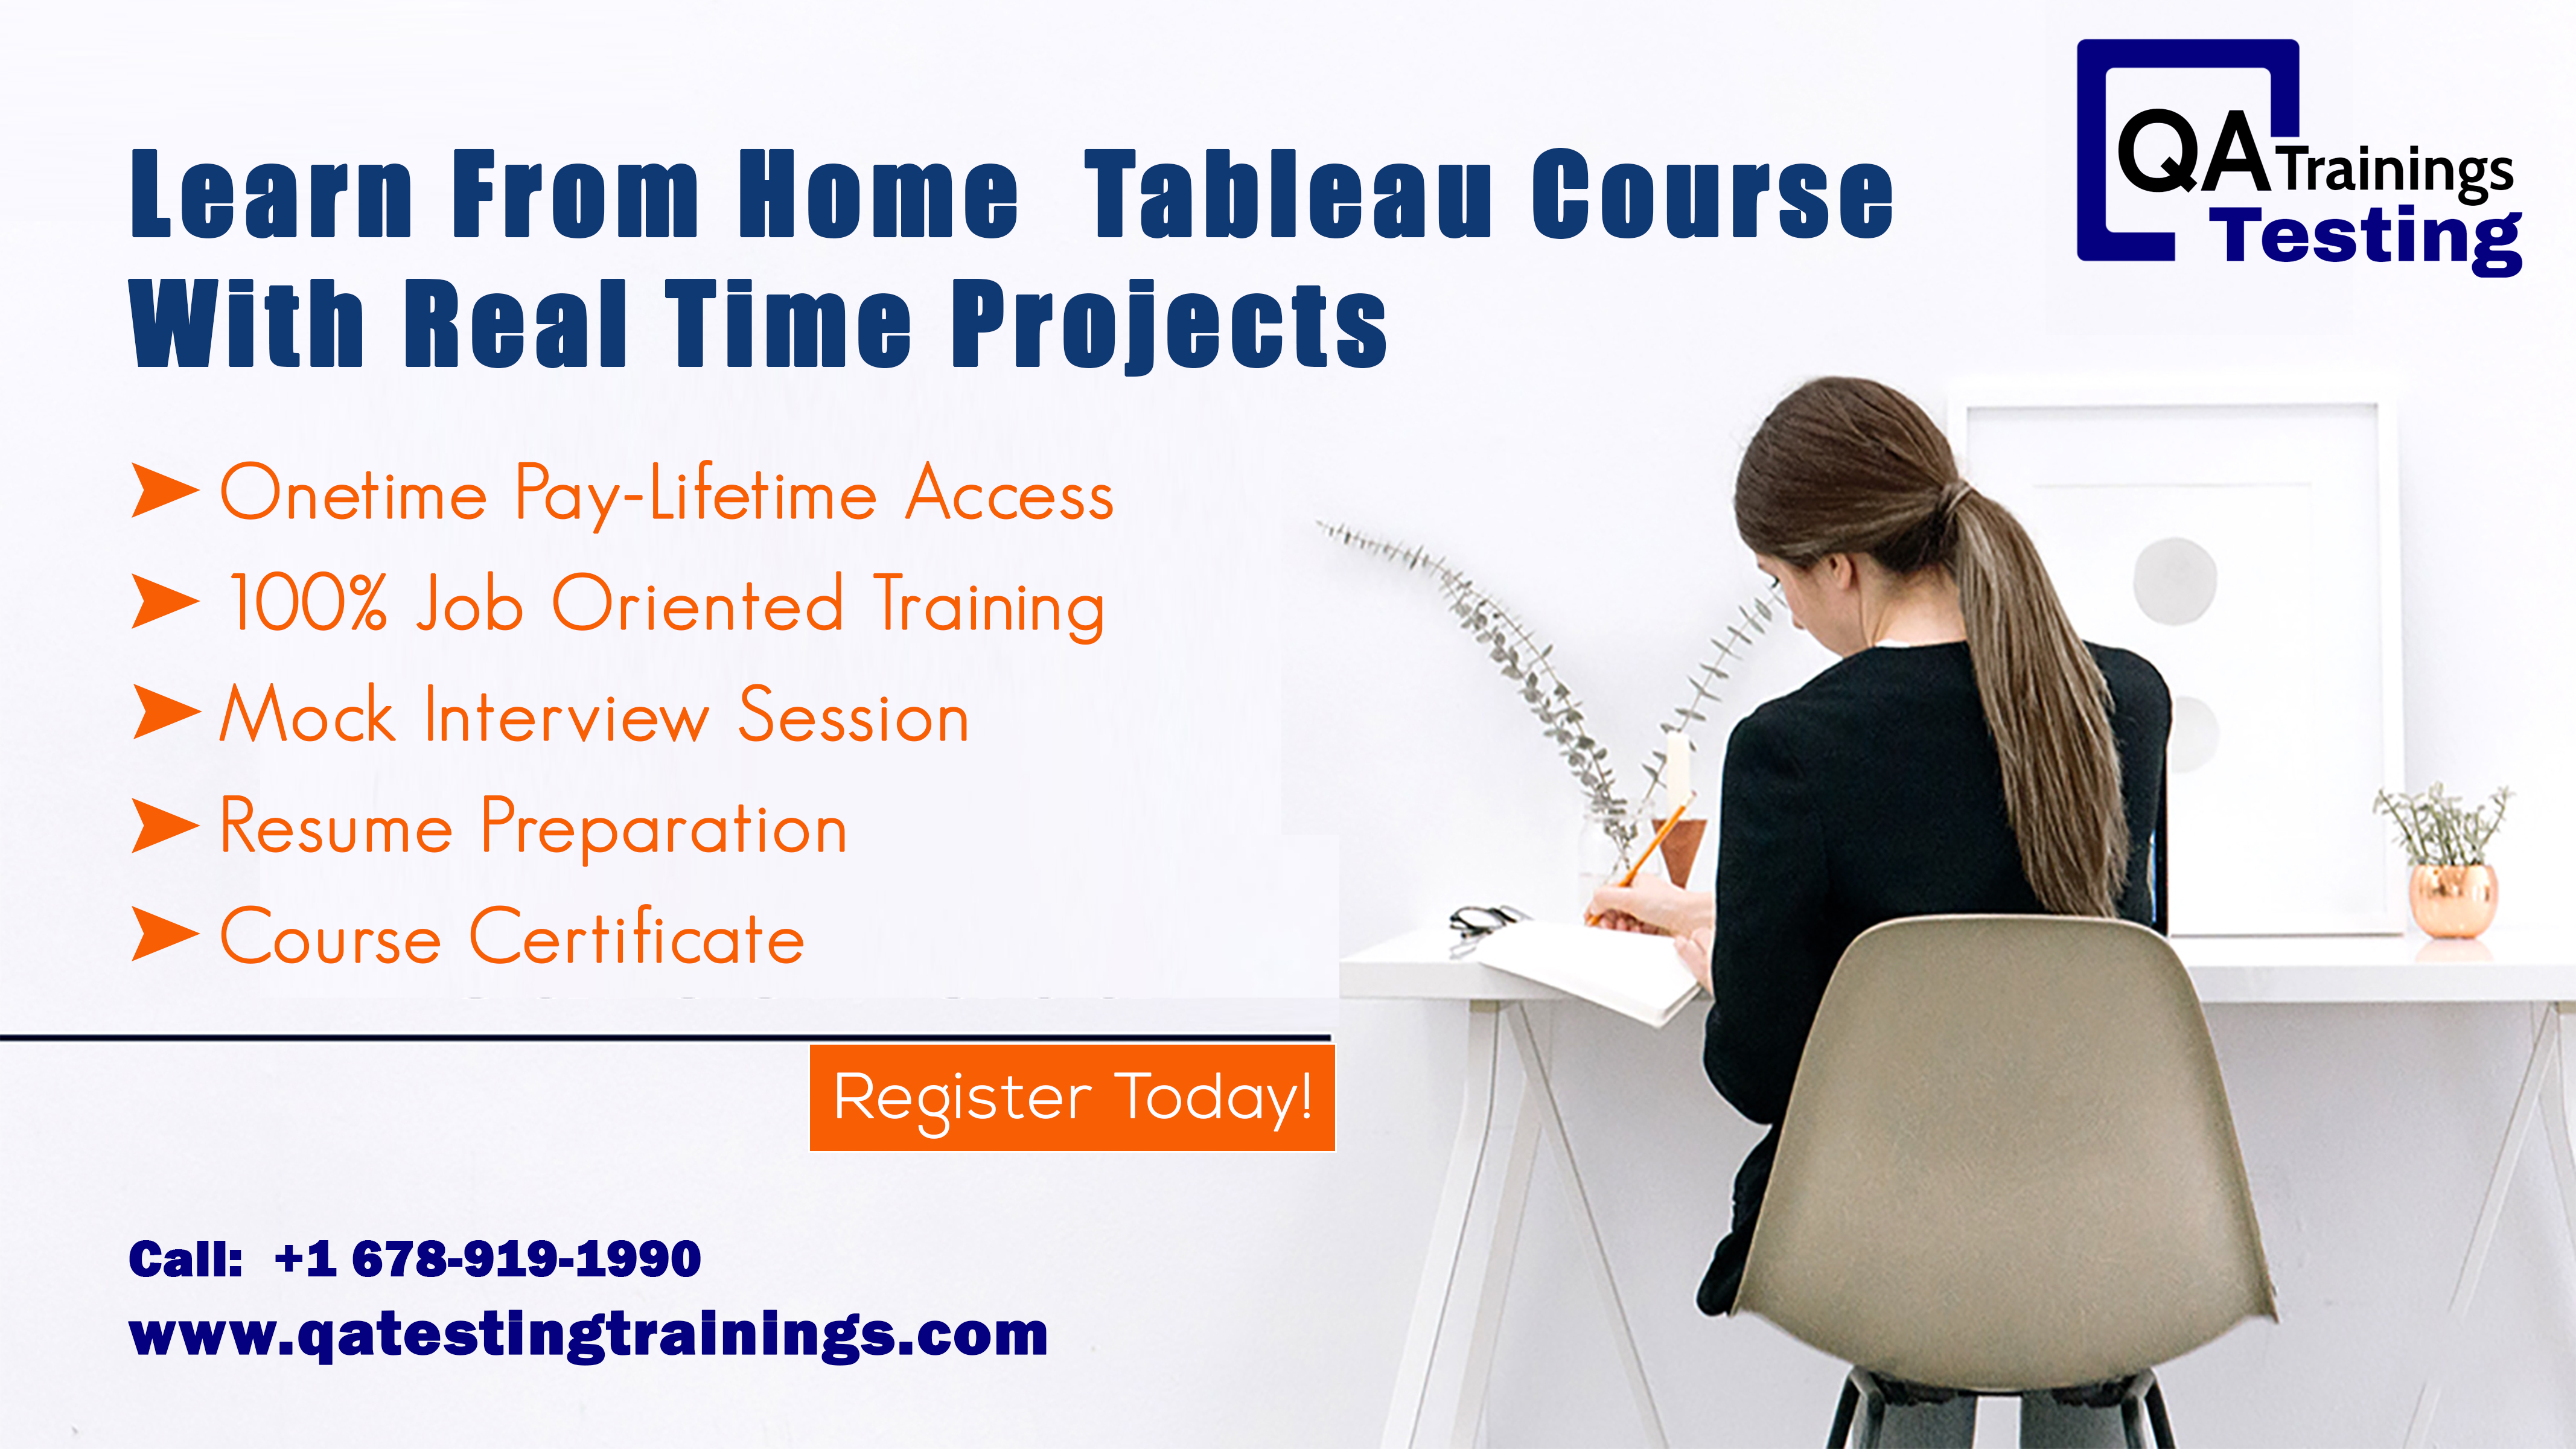 Stay Home and Learn Tableau Course